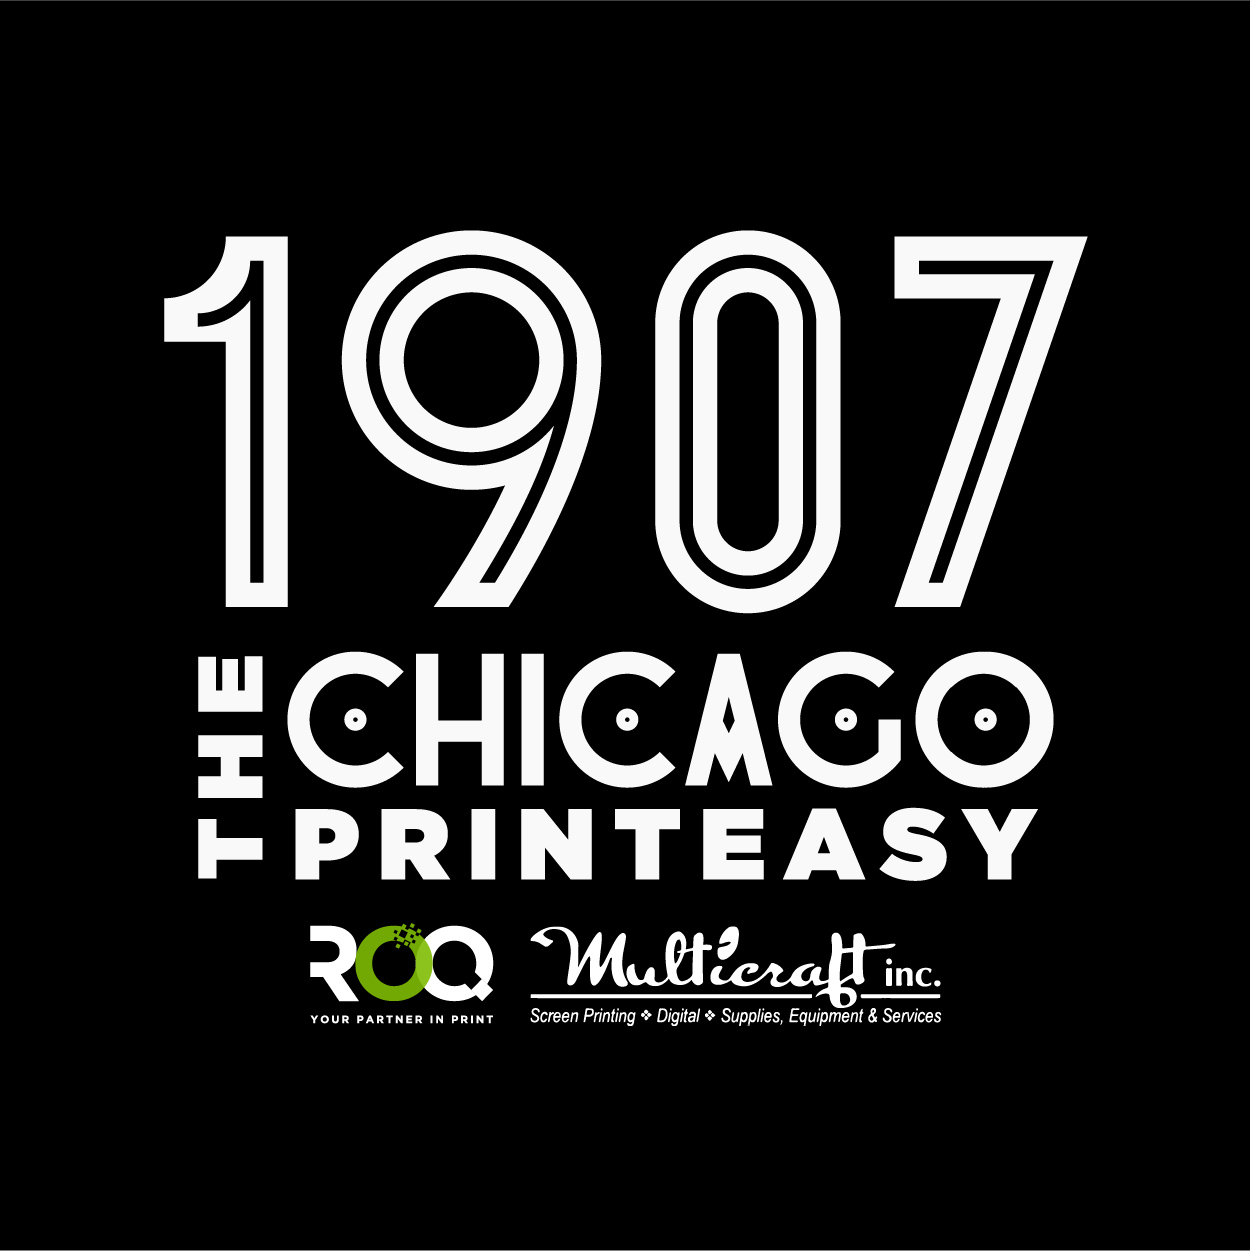 Multicraft & ROQ.US Announce Grand Opening of New Showroom in Chicago – 1907: The Chicago Printeasy